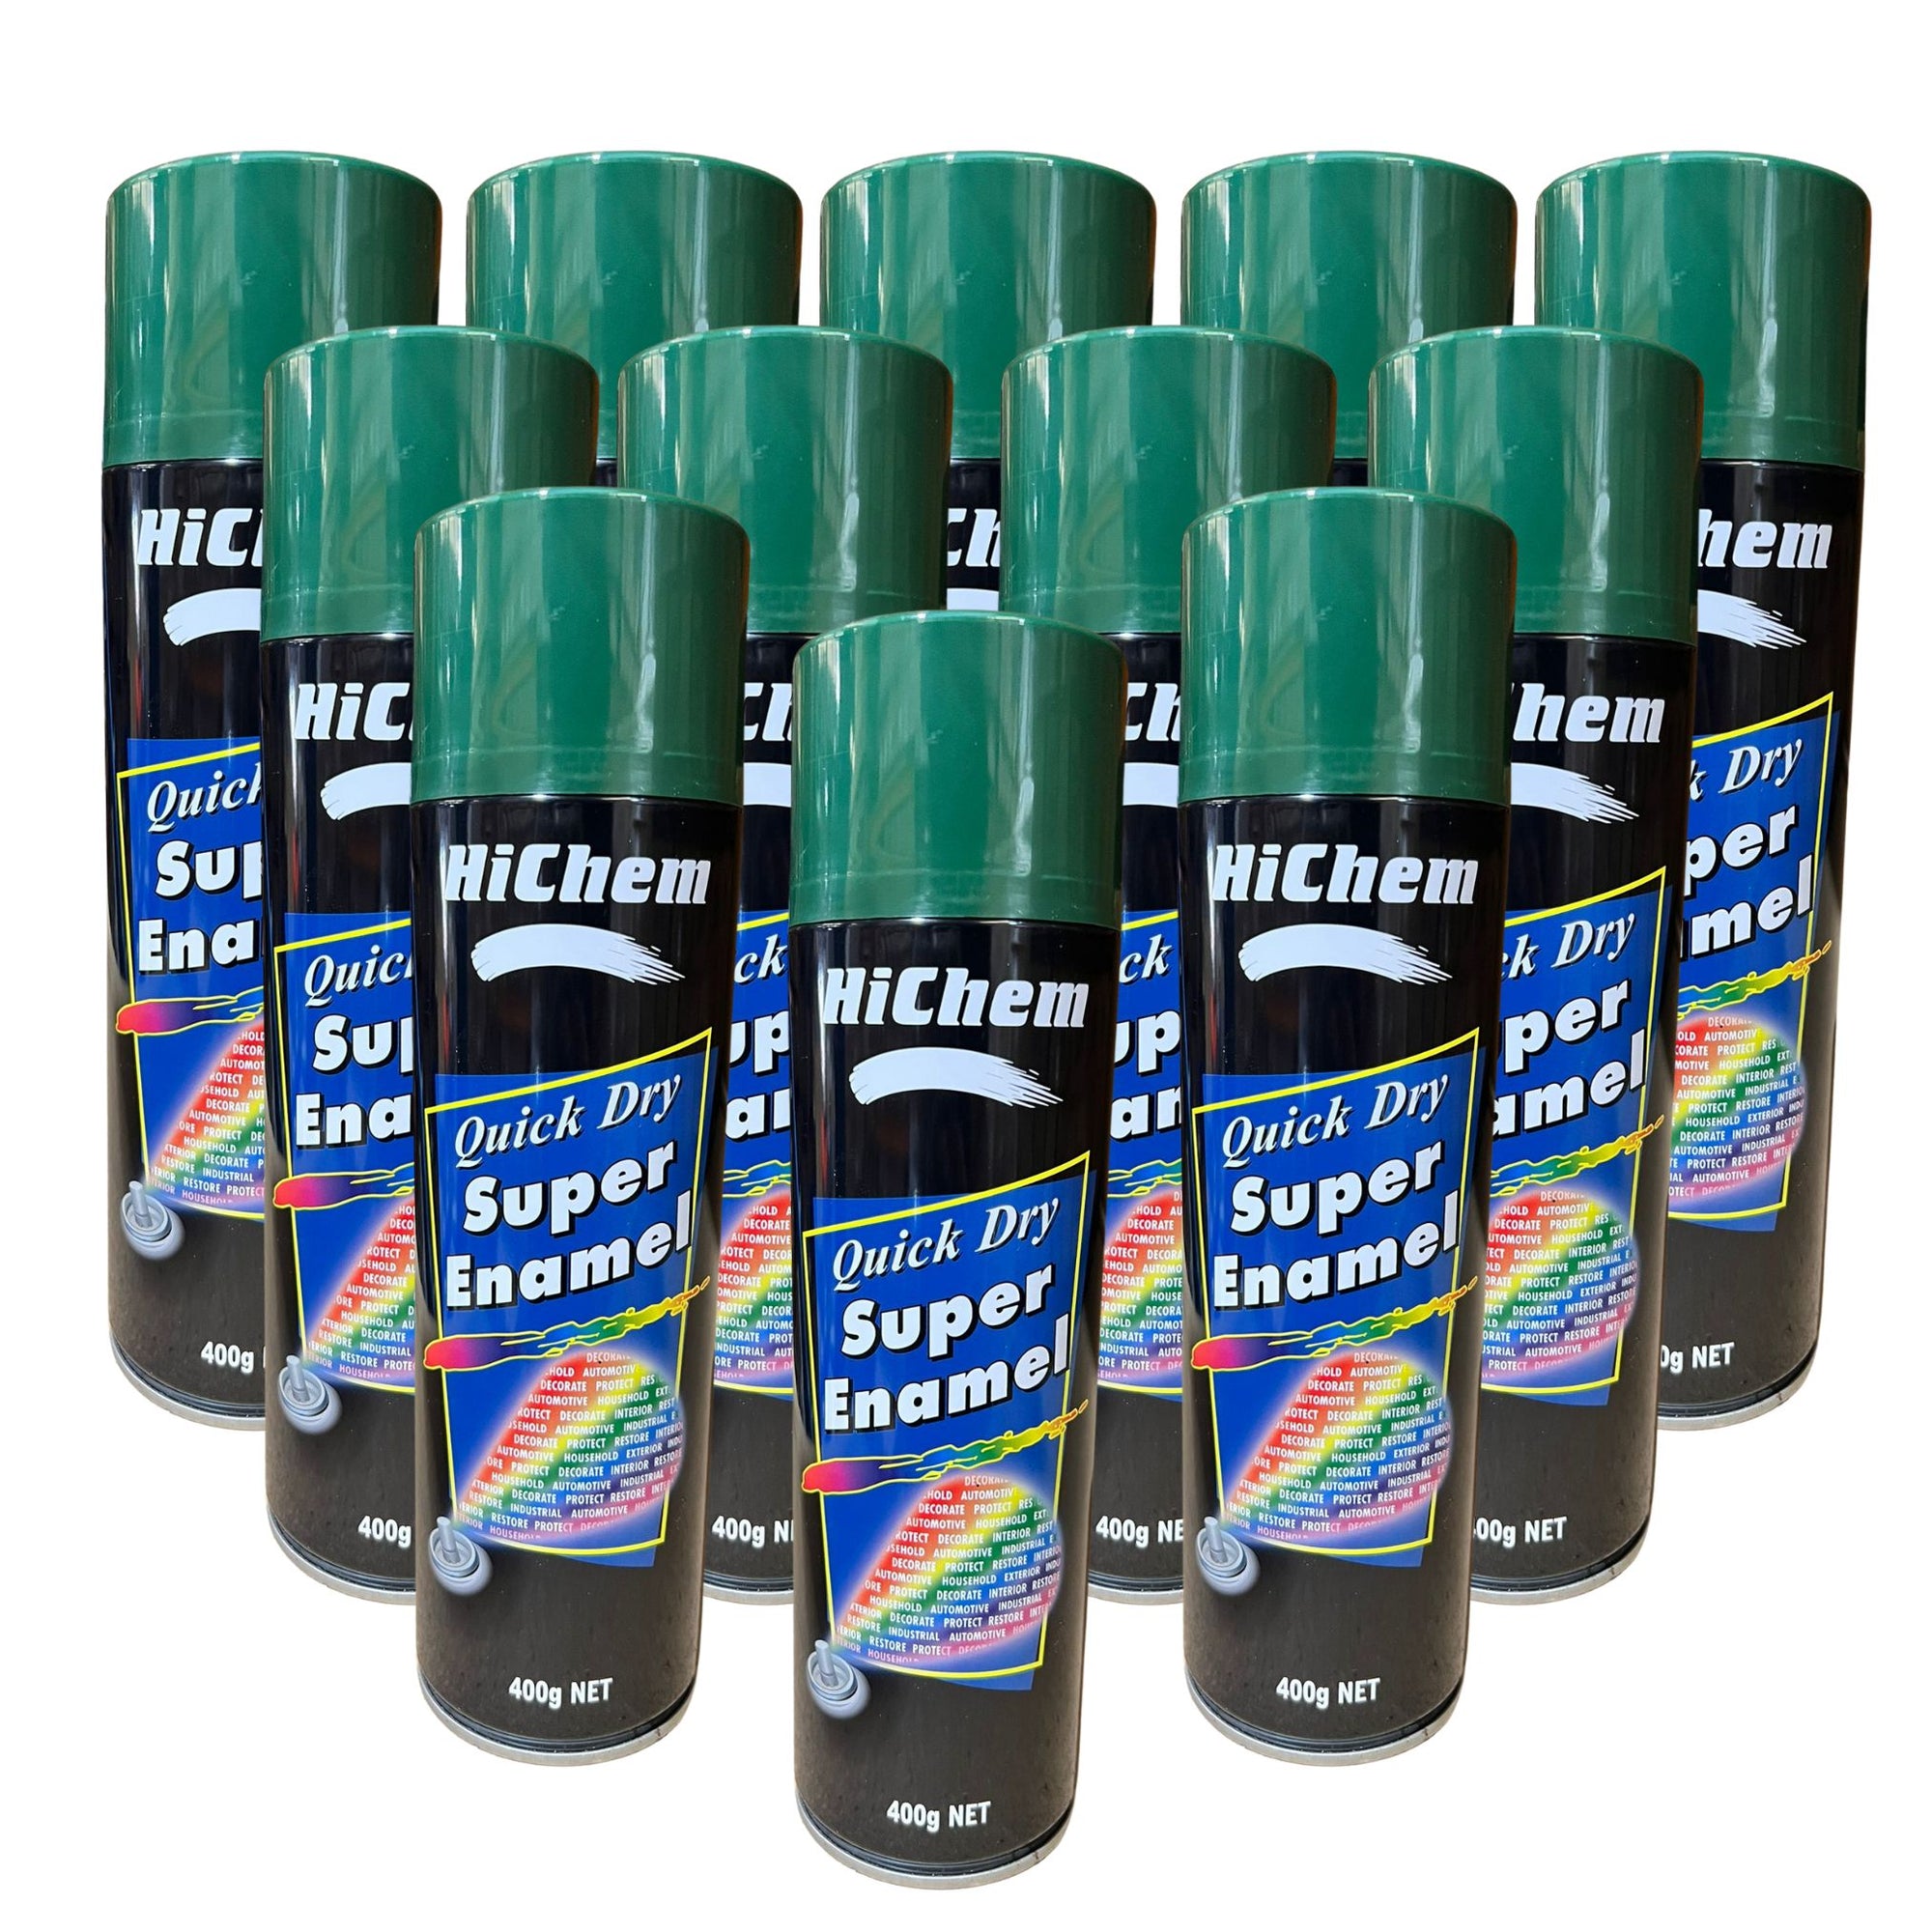 Hichem Quick Dry Super Enamel Spray Paint 12 Cans - Bottle Green - South East Clearance Centre